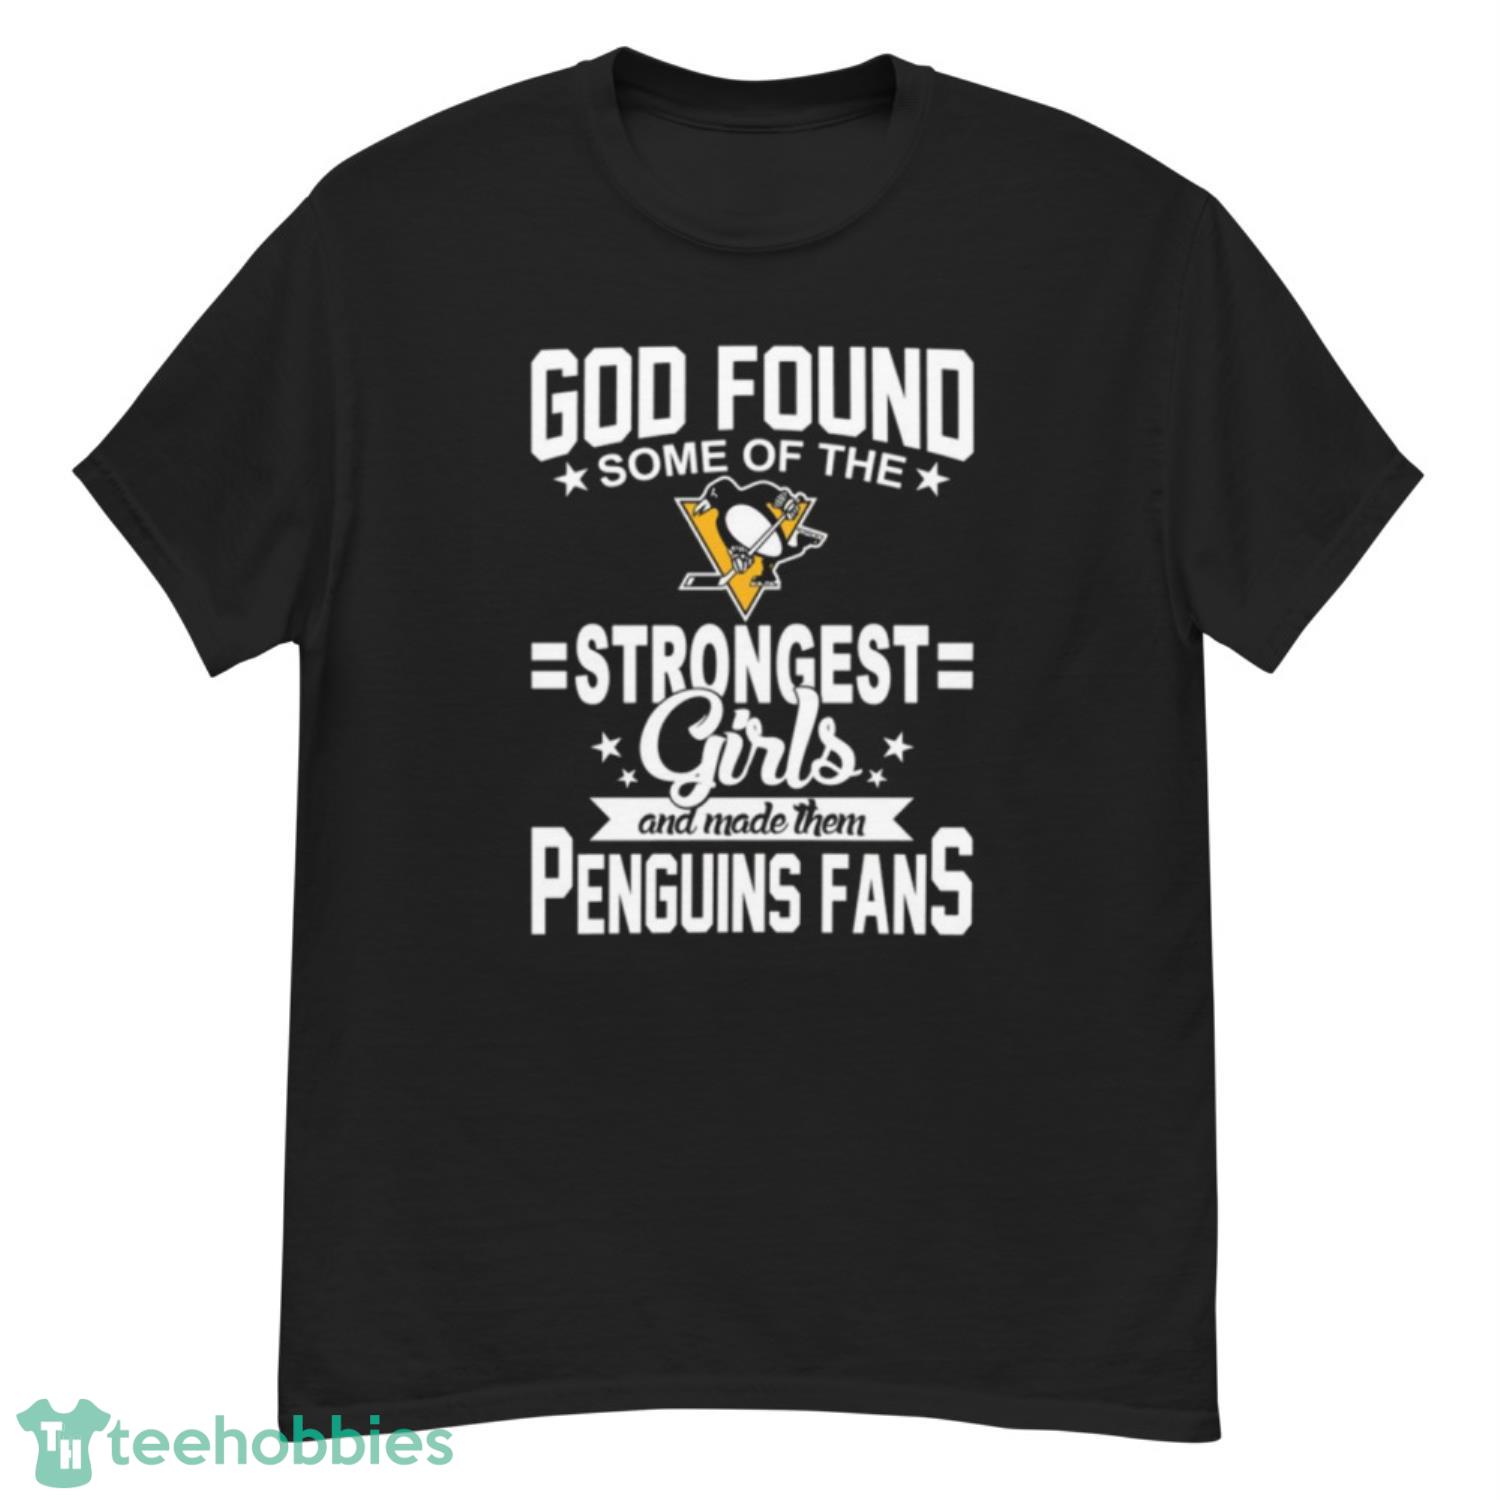 Pittsburgh Penguins NHL Football God Found Some Of The Strongest Girls Adoring Fans T Shirt - G500 Men’s Classic T-Shirt